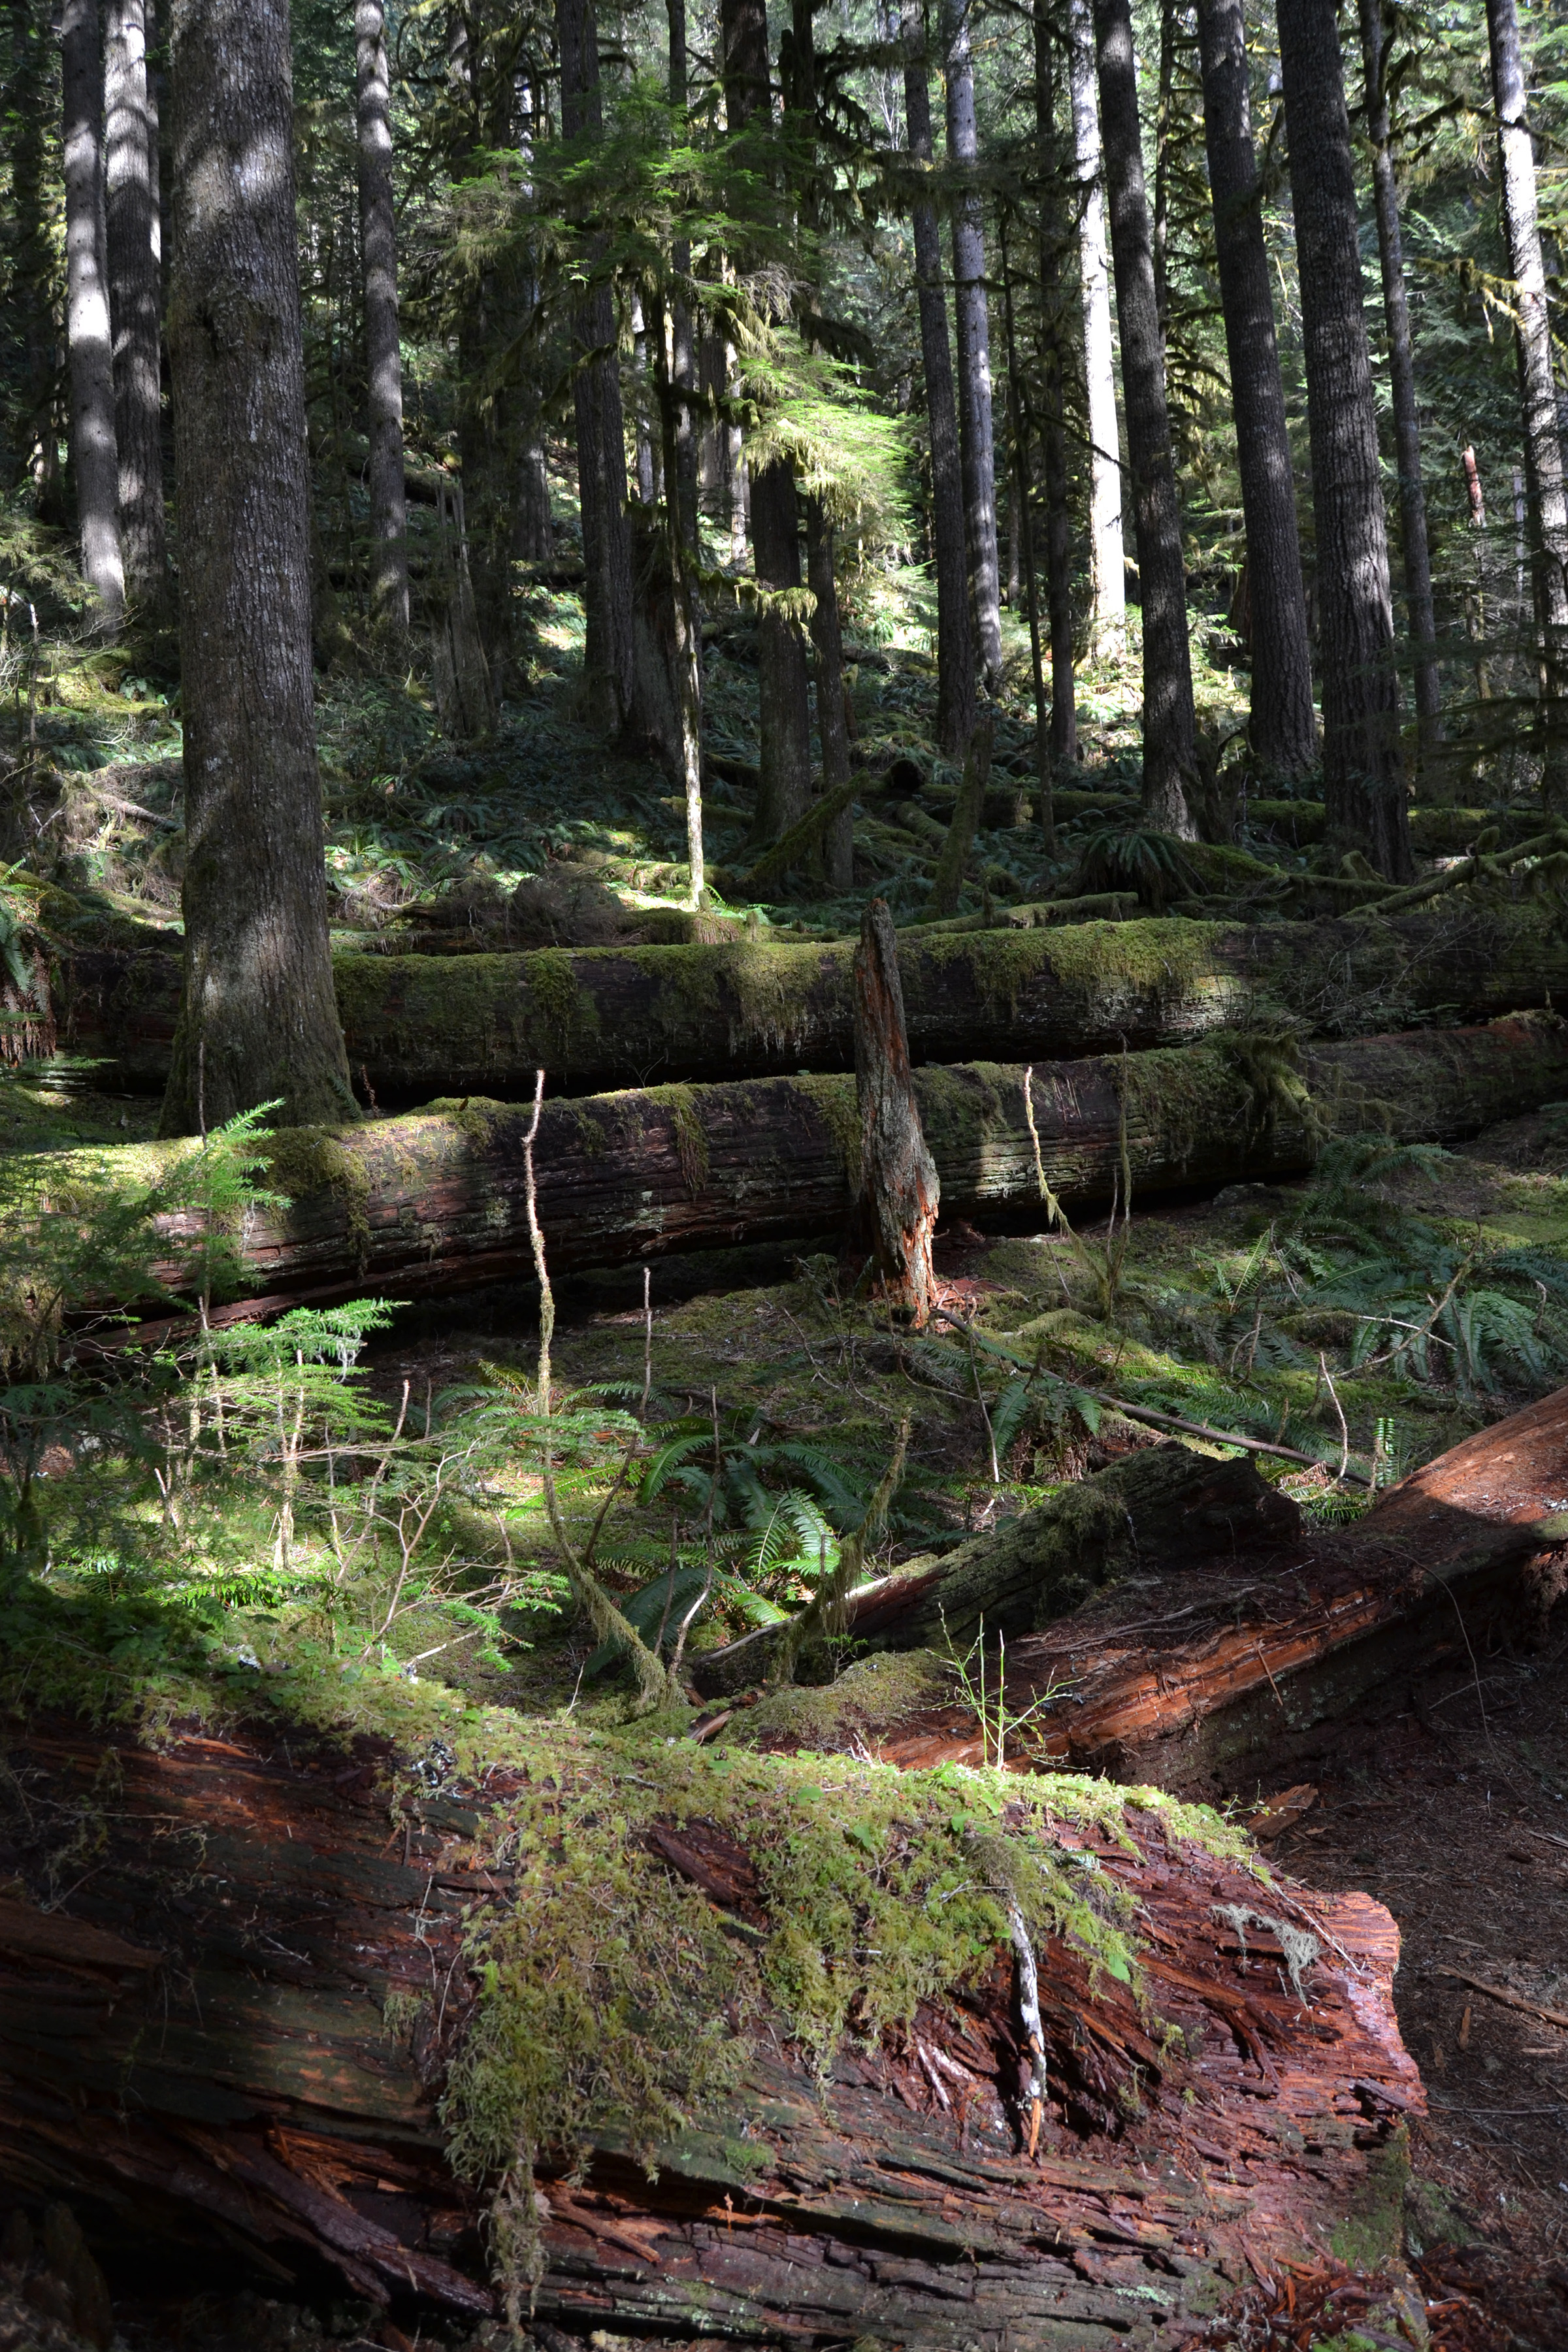 Towering trees and fallen logs are draped in green mosses in this old-growth forest.